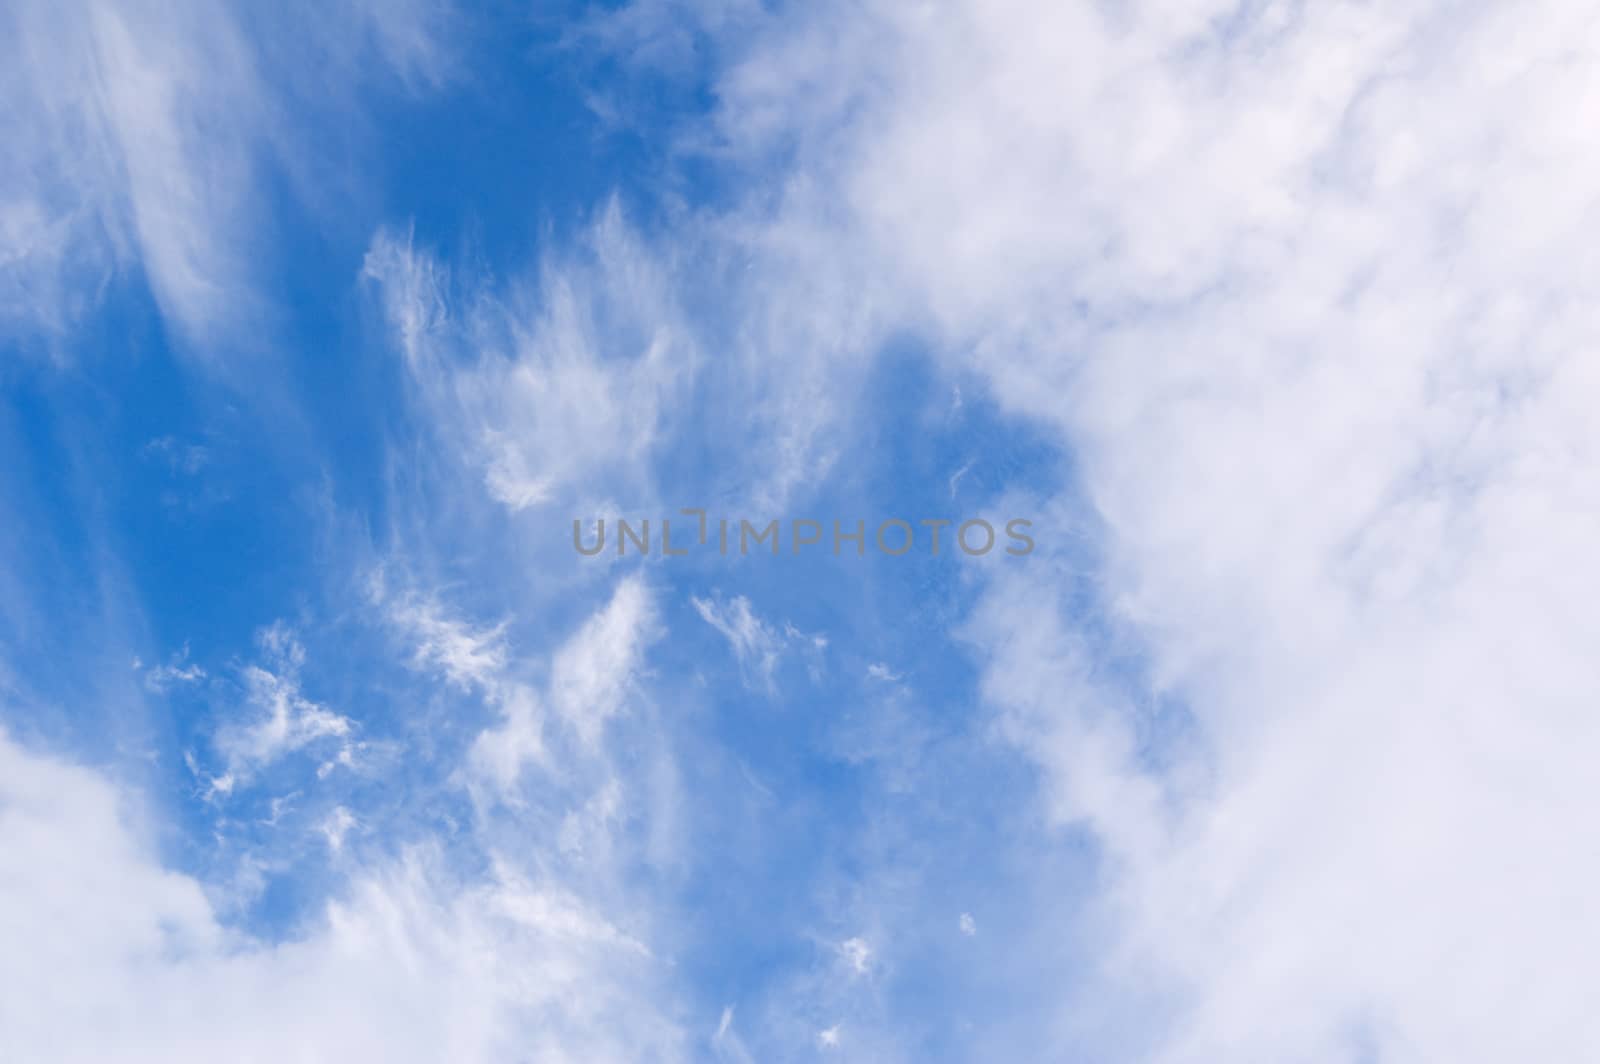 High white clouds on blue sky background